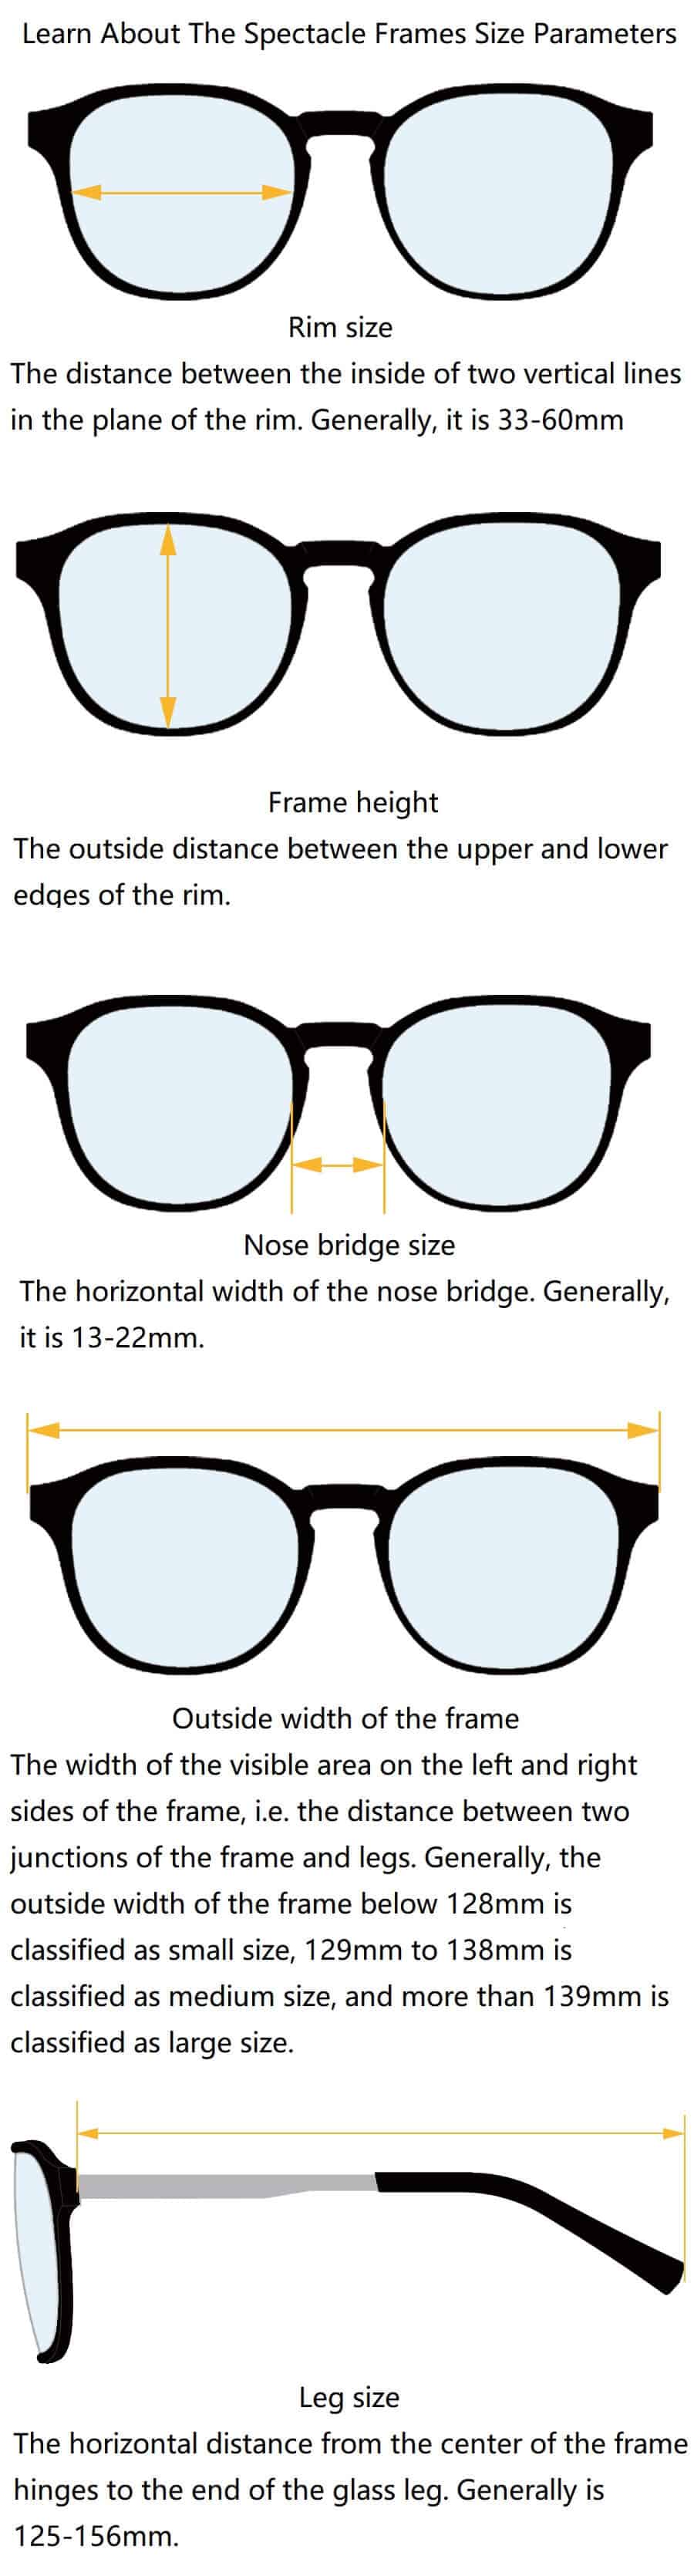 Lensmart Tell You About the Spectacle Frames Size Parameters